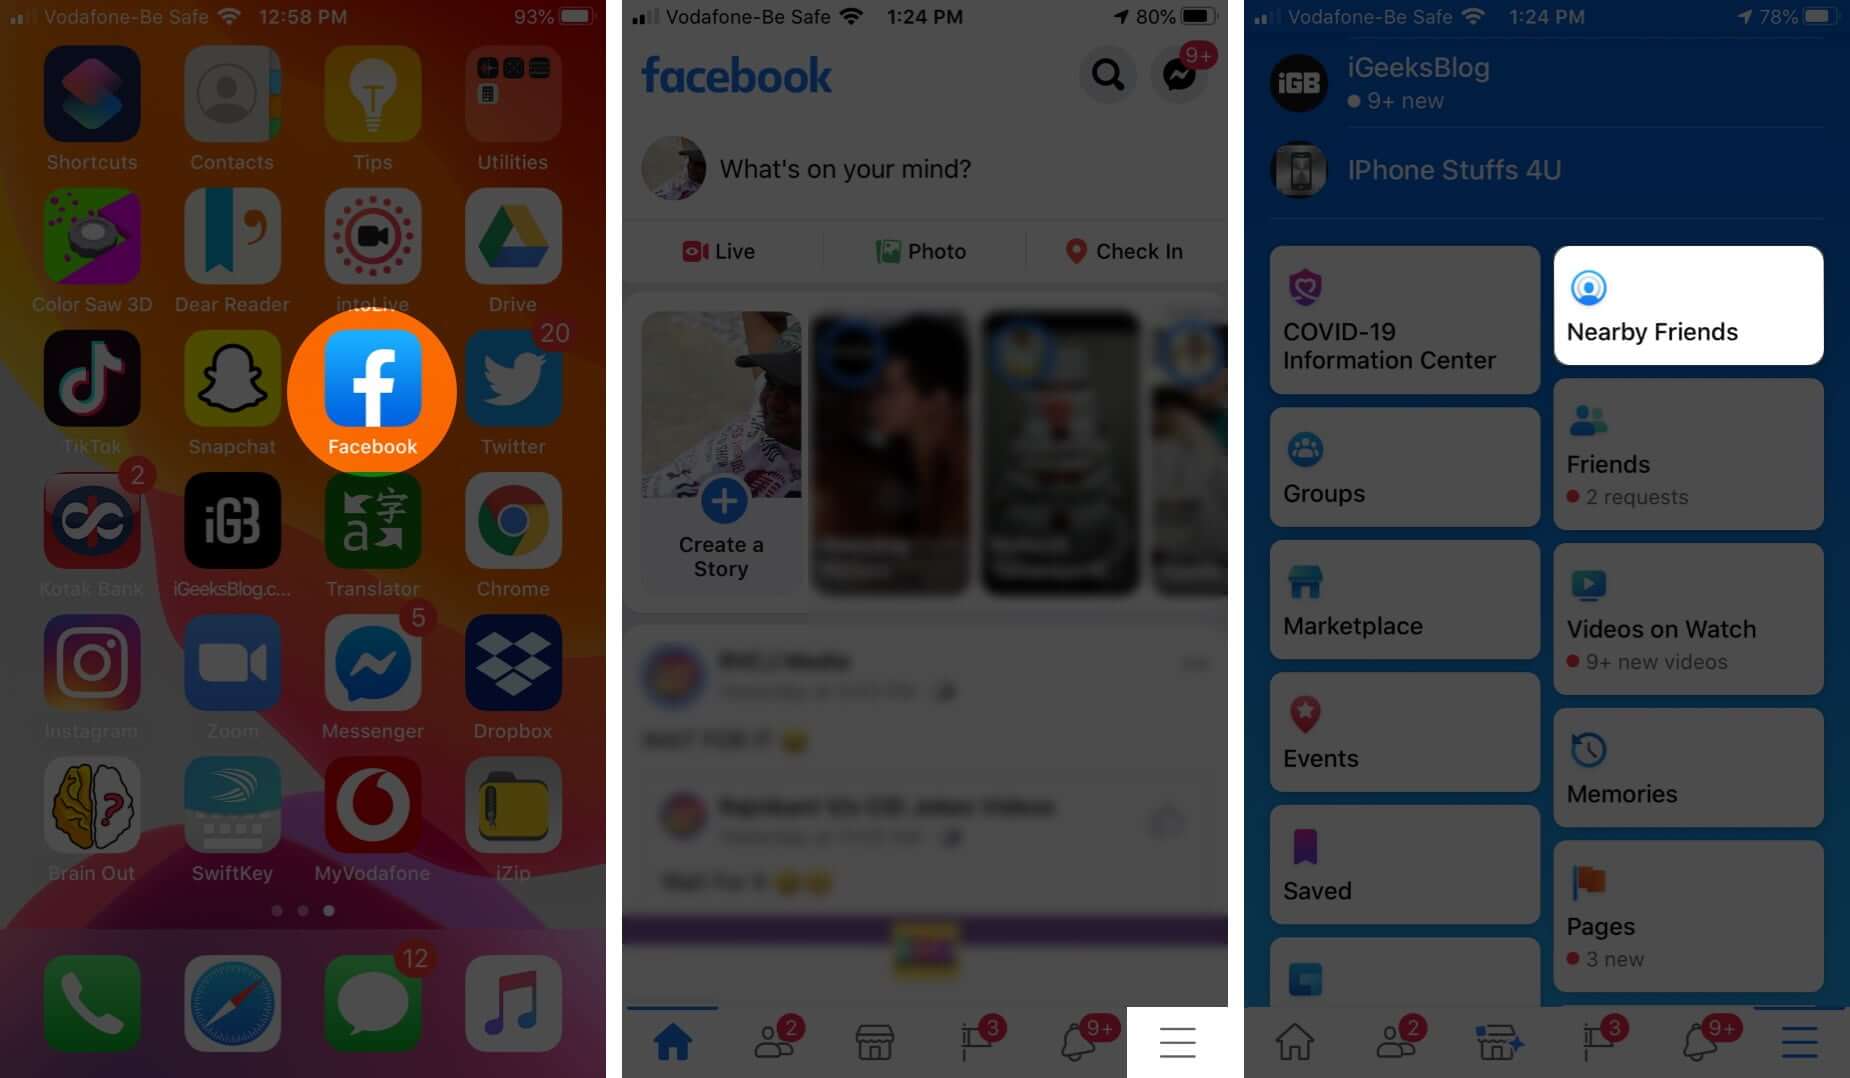 Open Facebook App Tap on Three Lines and Then Tap on Nearby Friends